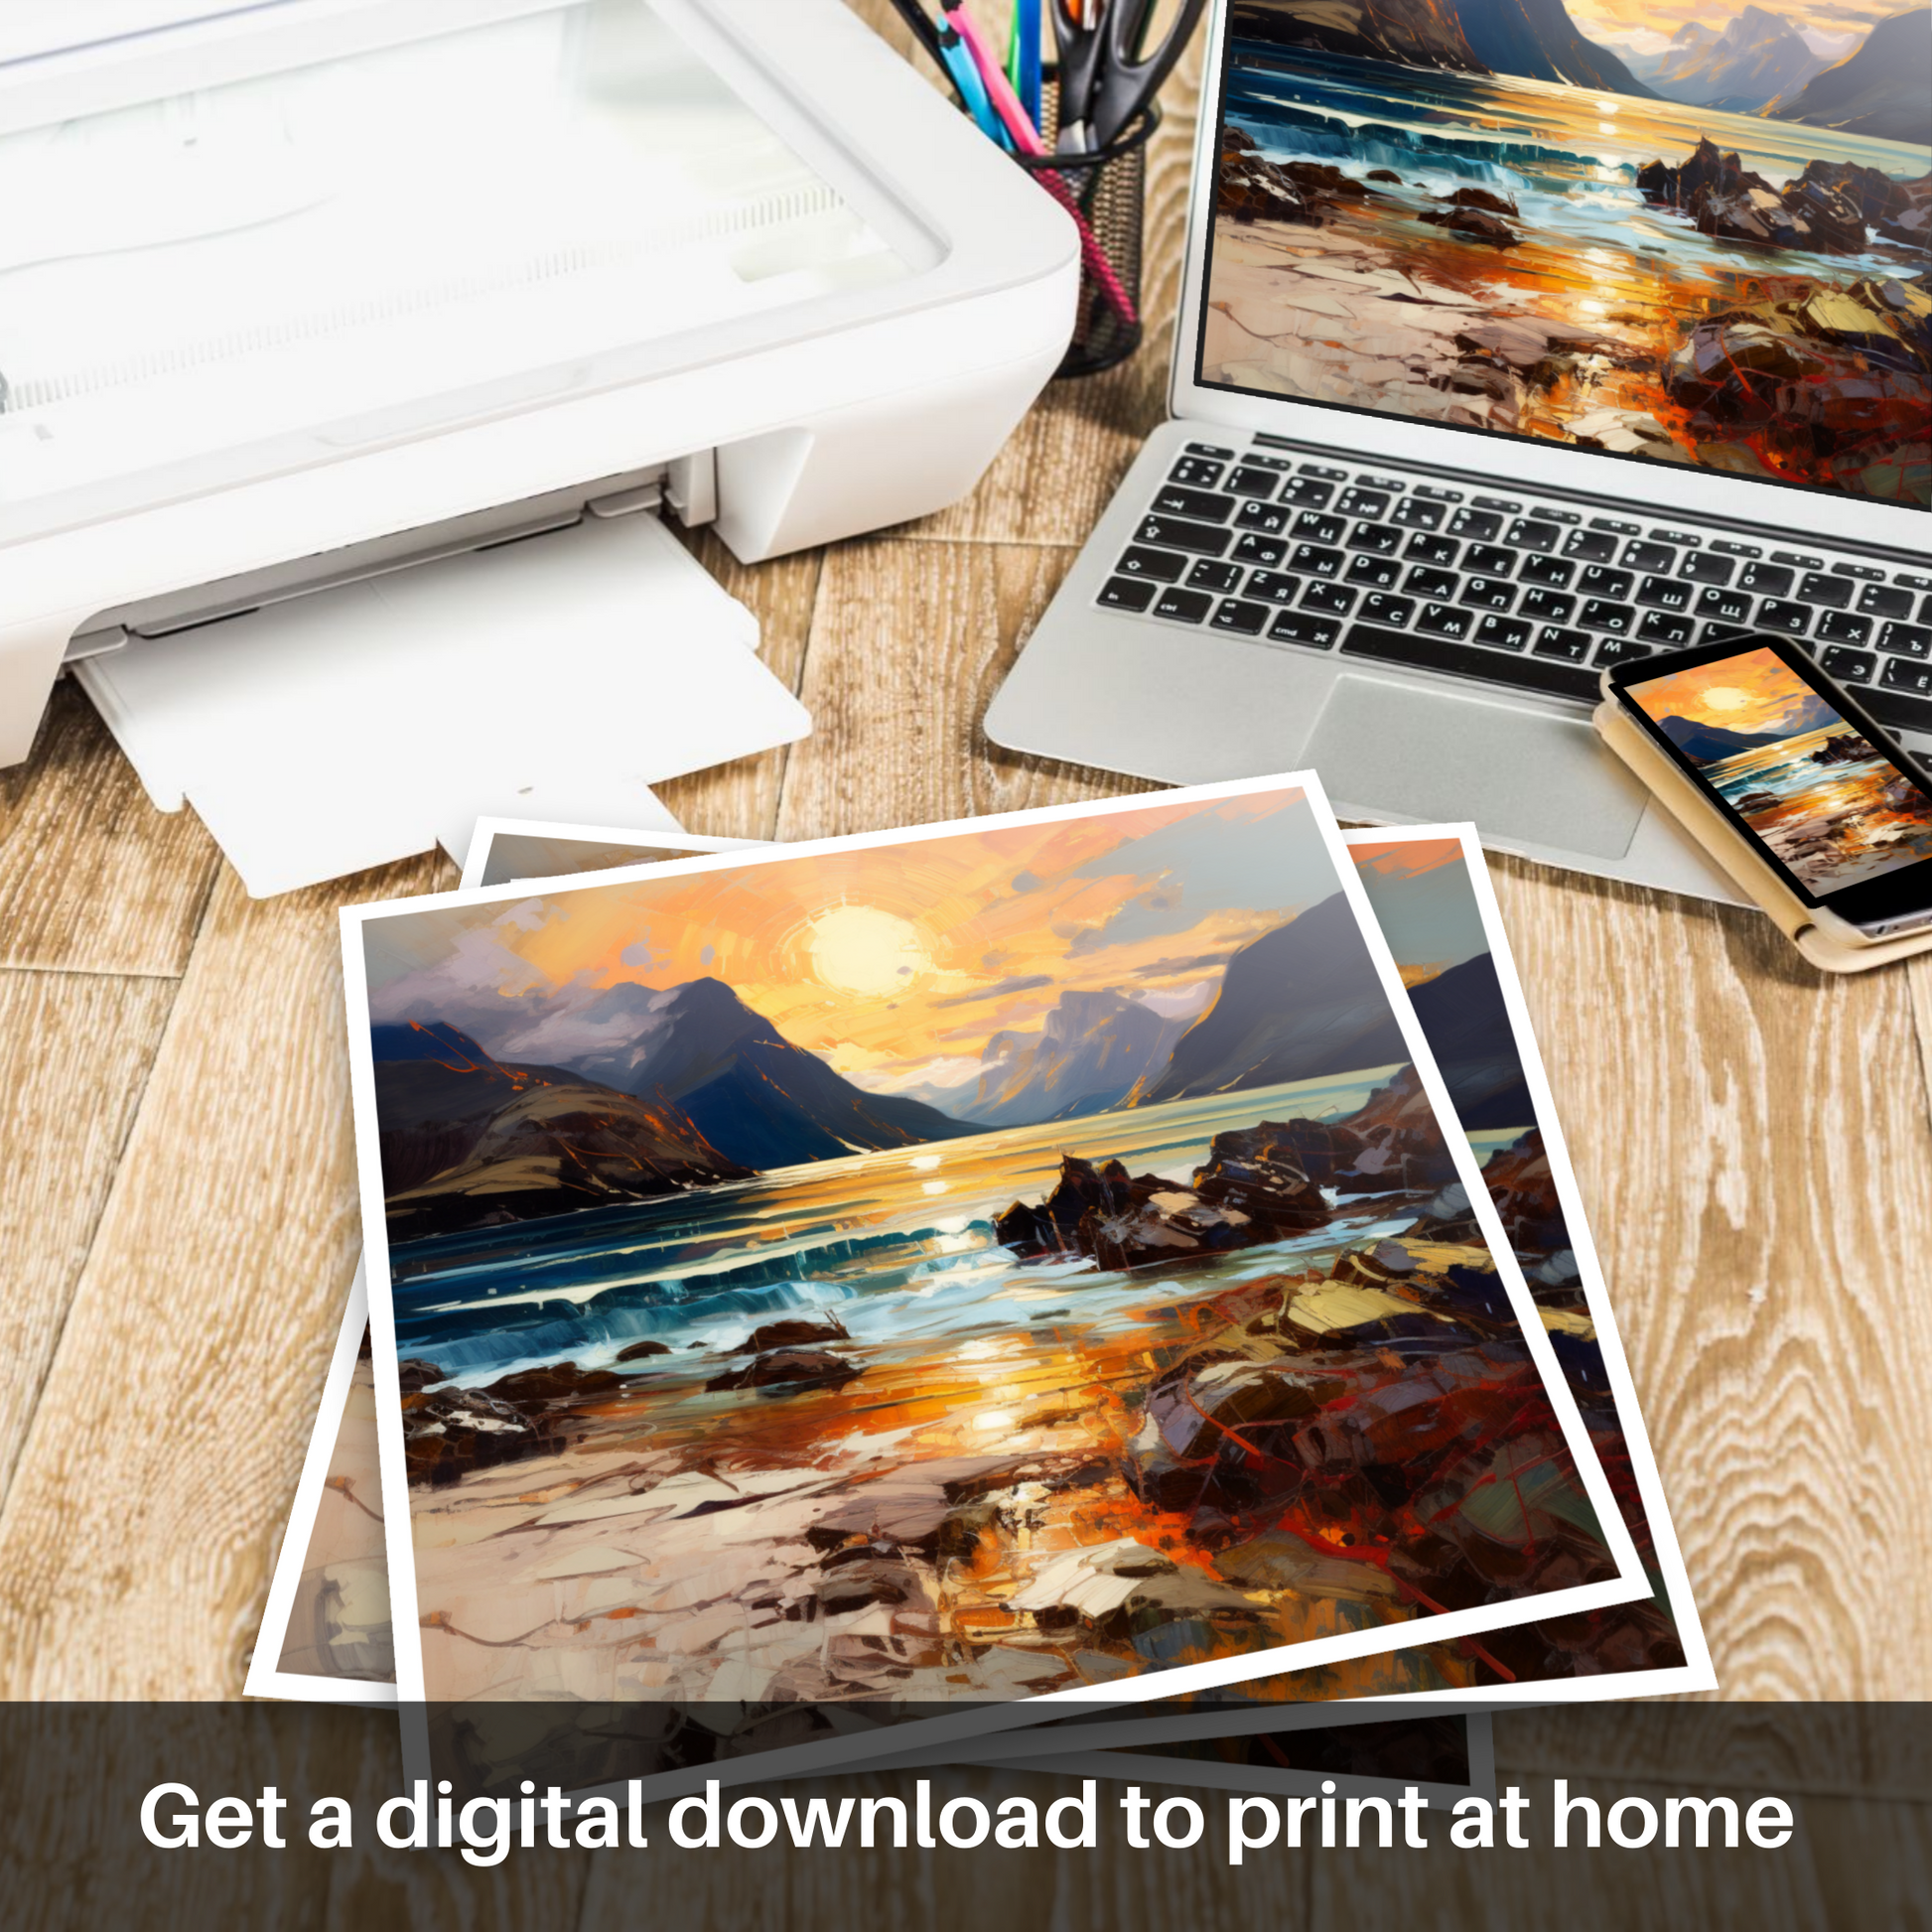 Downloadable and printable picture of Elgol Bay at sunset